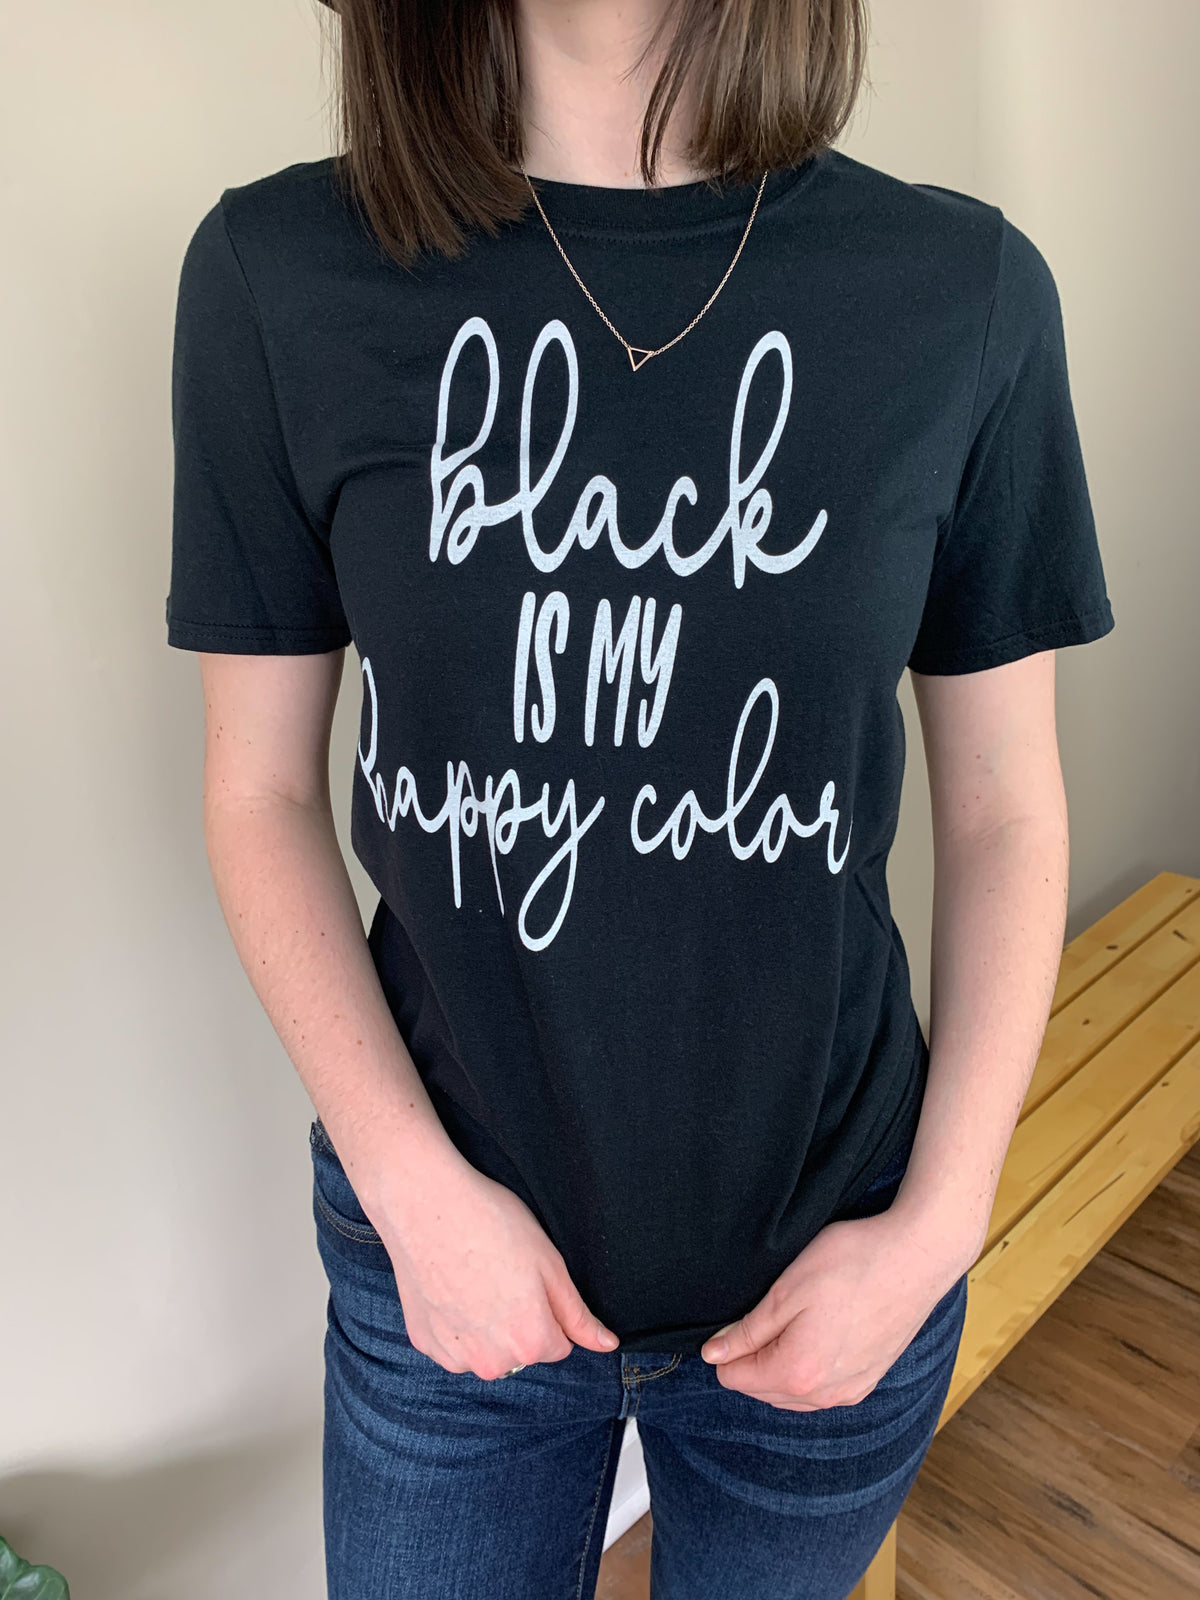 “Black is my happy color” graphic tee